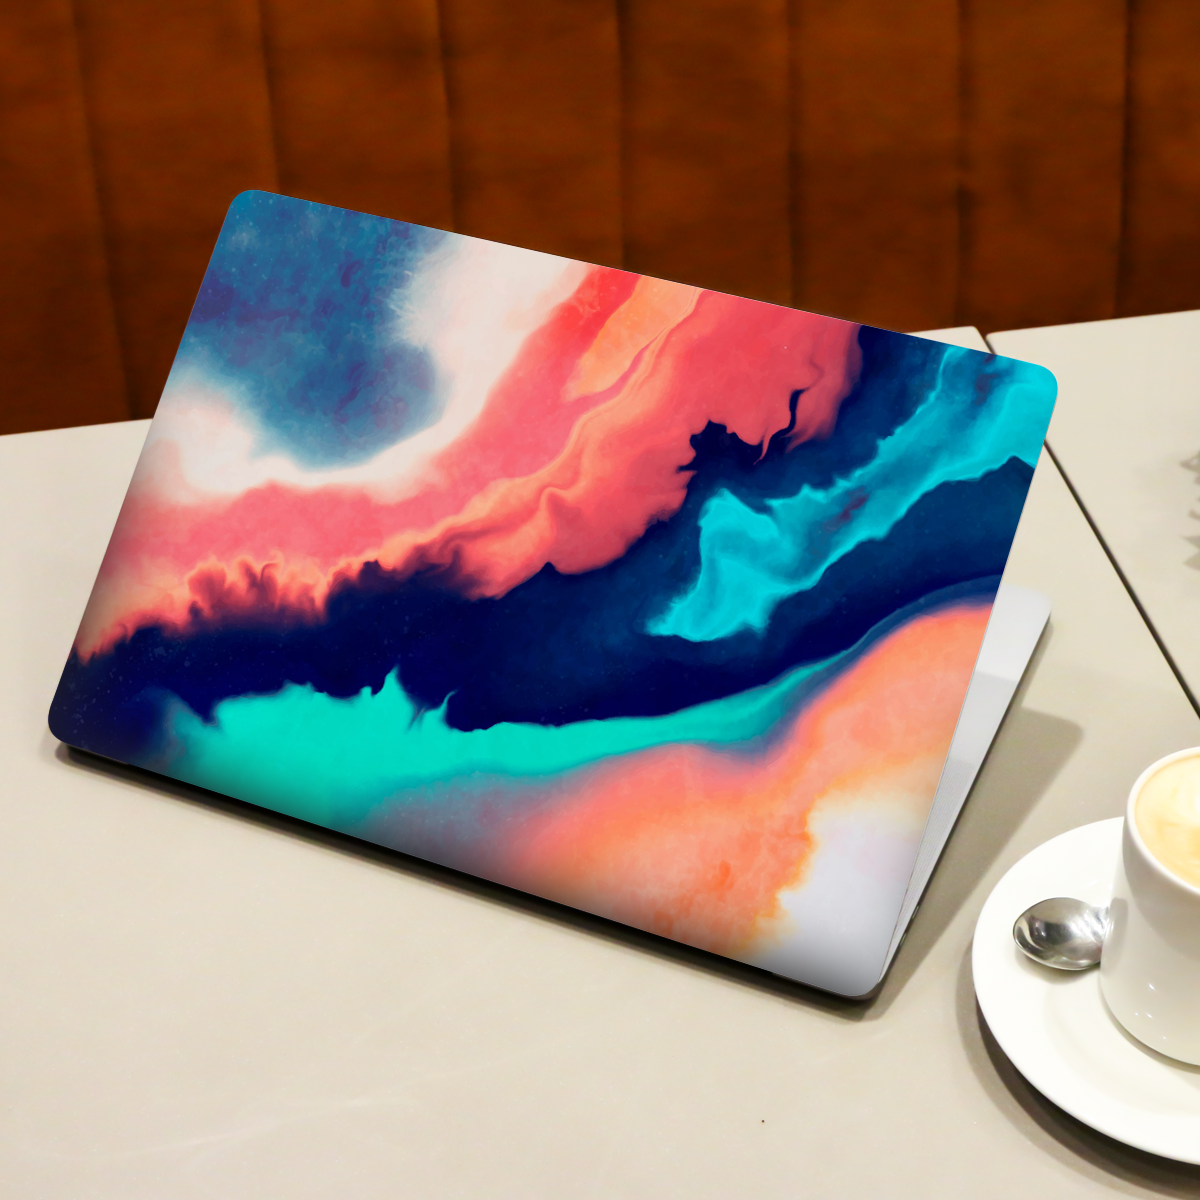 Acrylic Paint Spill Abstract Laptop Skin